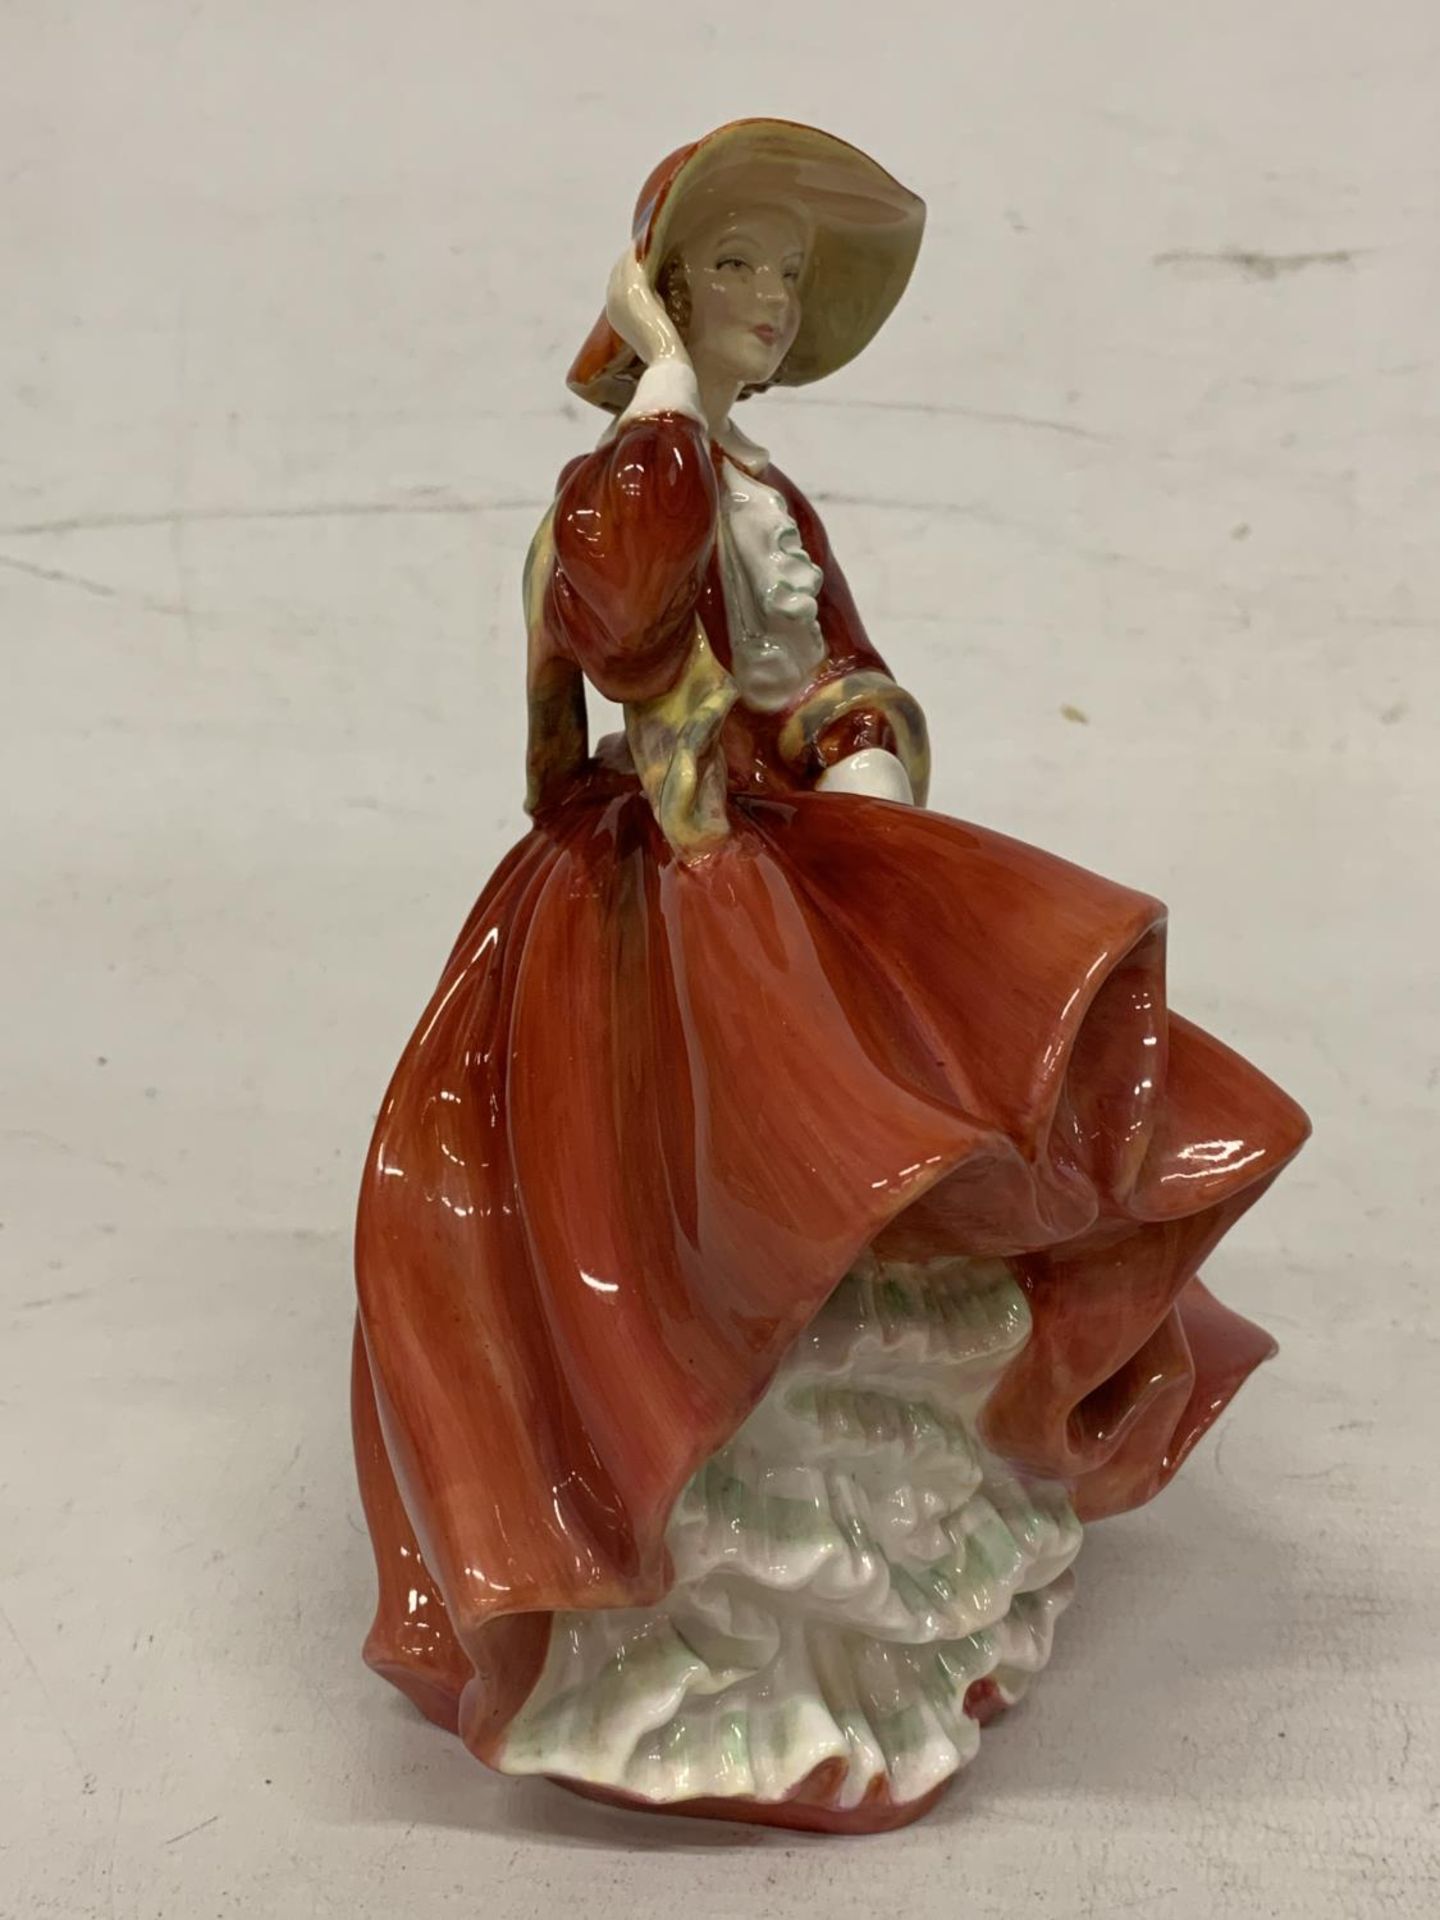 A ROYAL DOULTON FIGURINE "TOP O' THE HILL" HN 1834 - Image 4 of 5